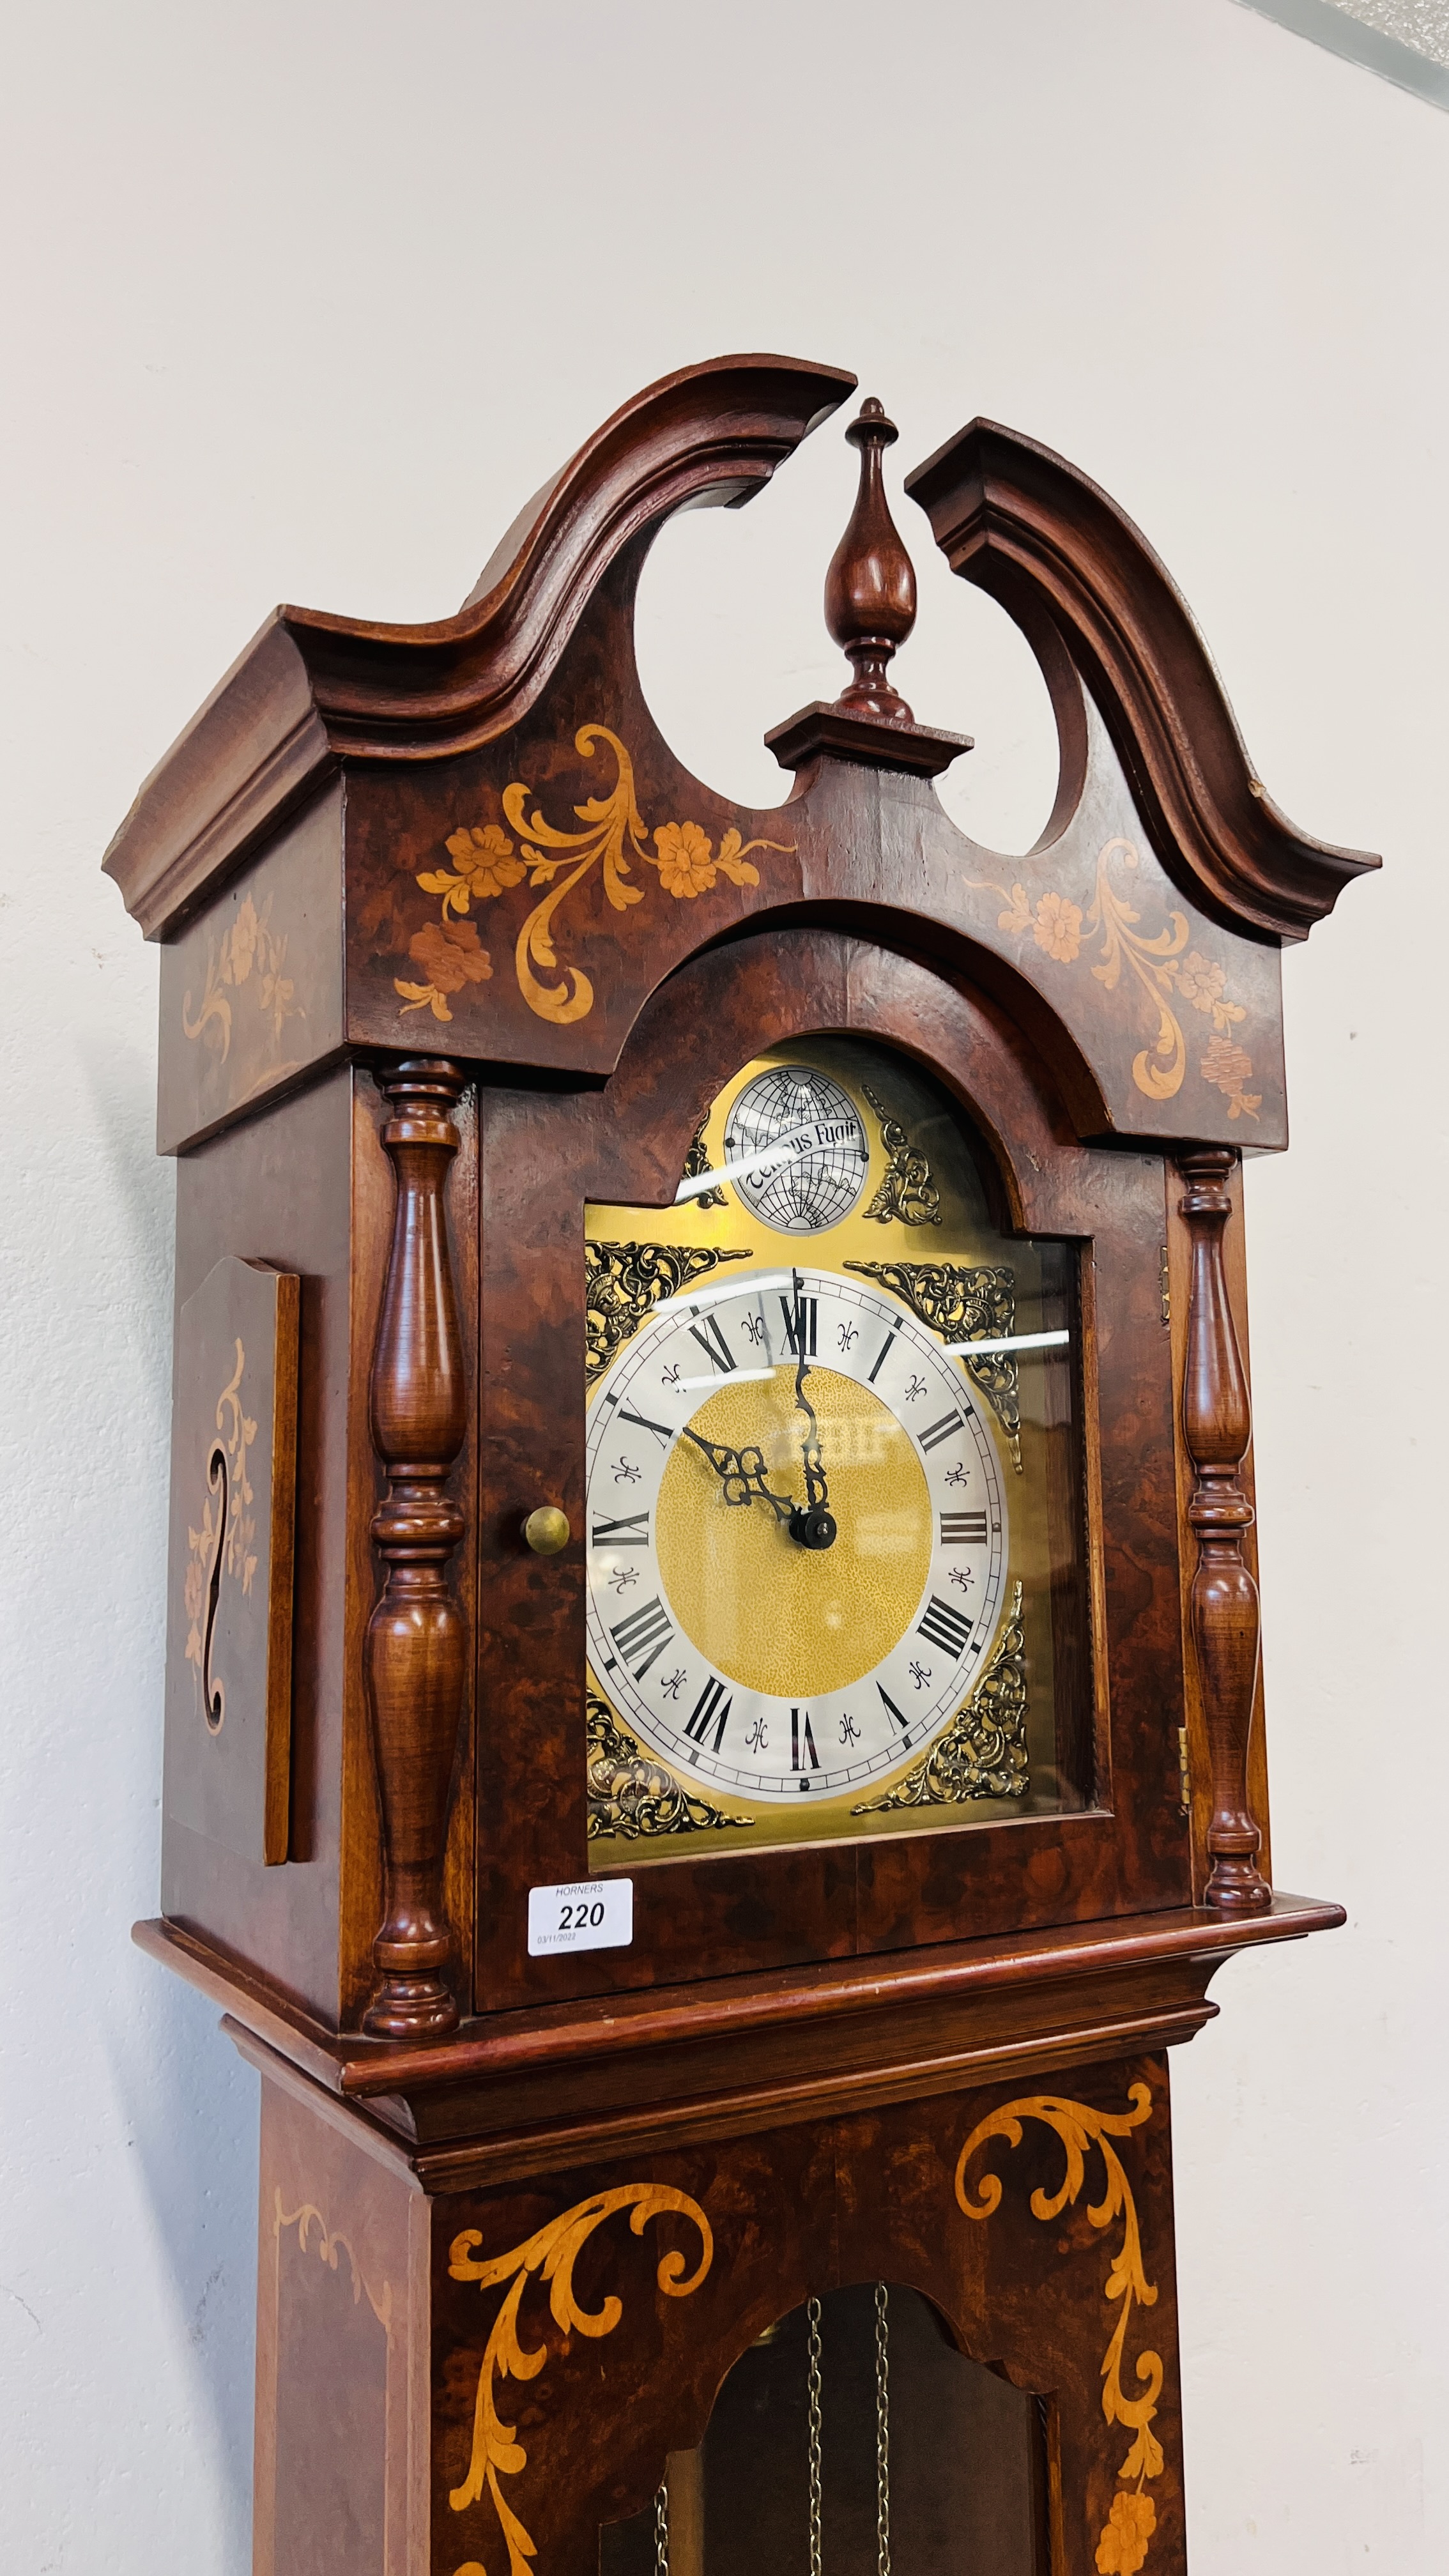 A REPRODUCTION DUTCH STYLE LONG CASE CLOCK WITH MARQUETRY INLAID STYLE DETAILING FACE MARKED TEMPUS - Image 8 of 13